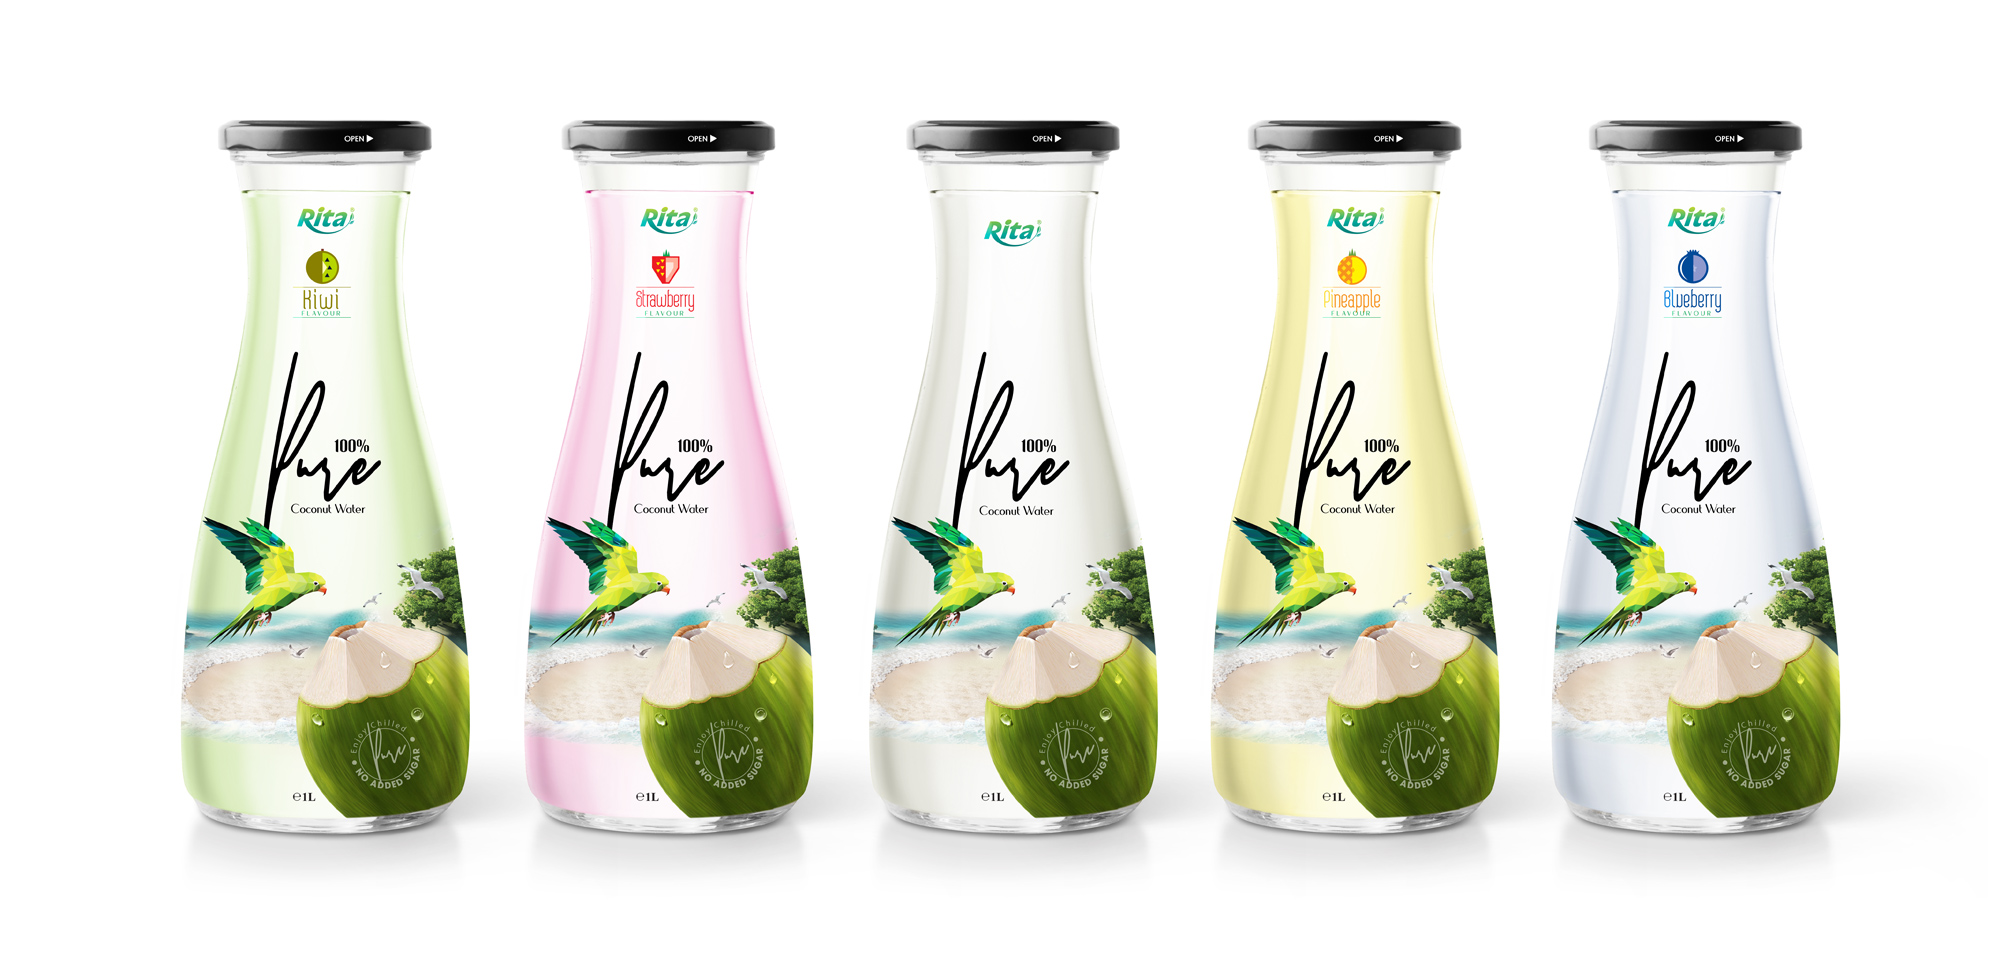 Coconut water with blueberry flavour of juice manufacturers from Juice 